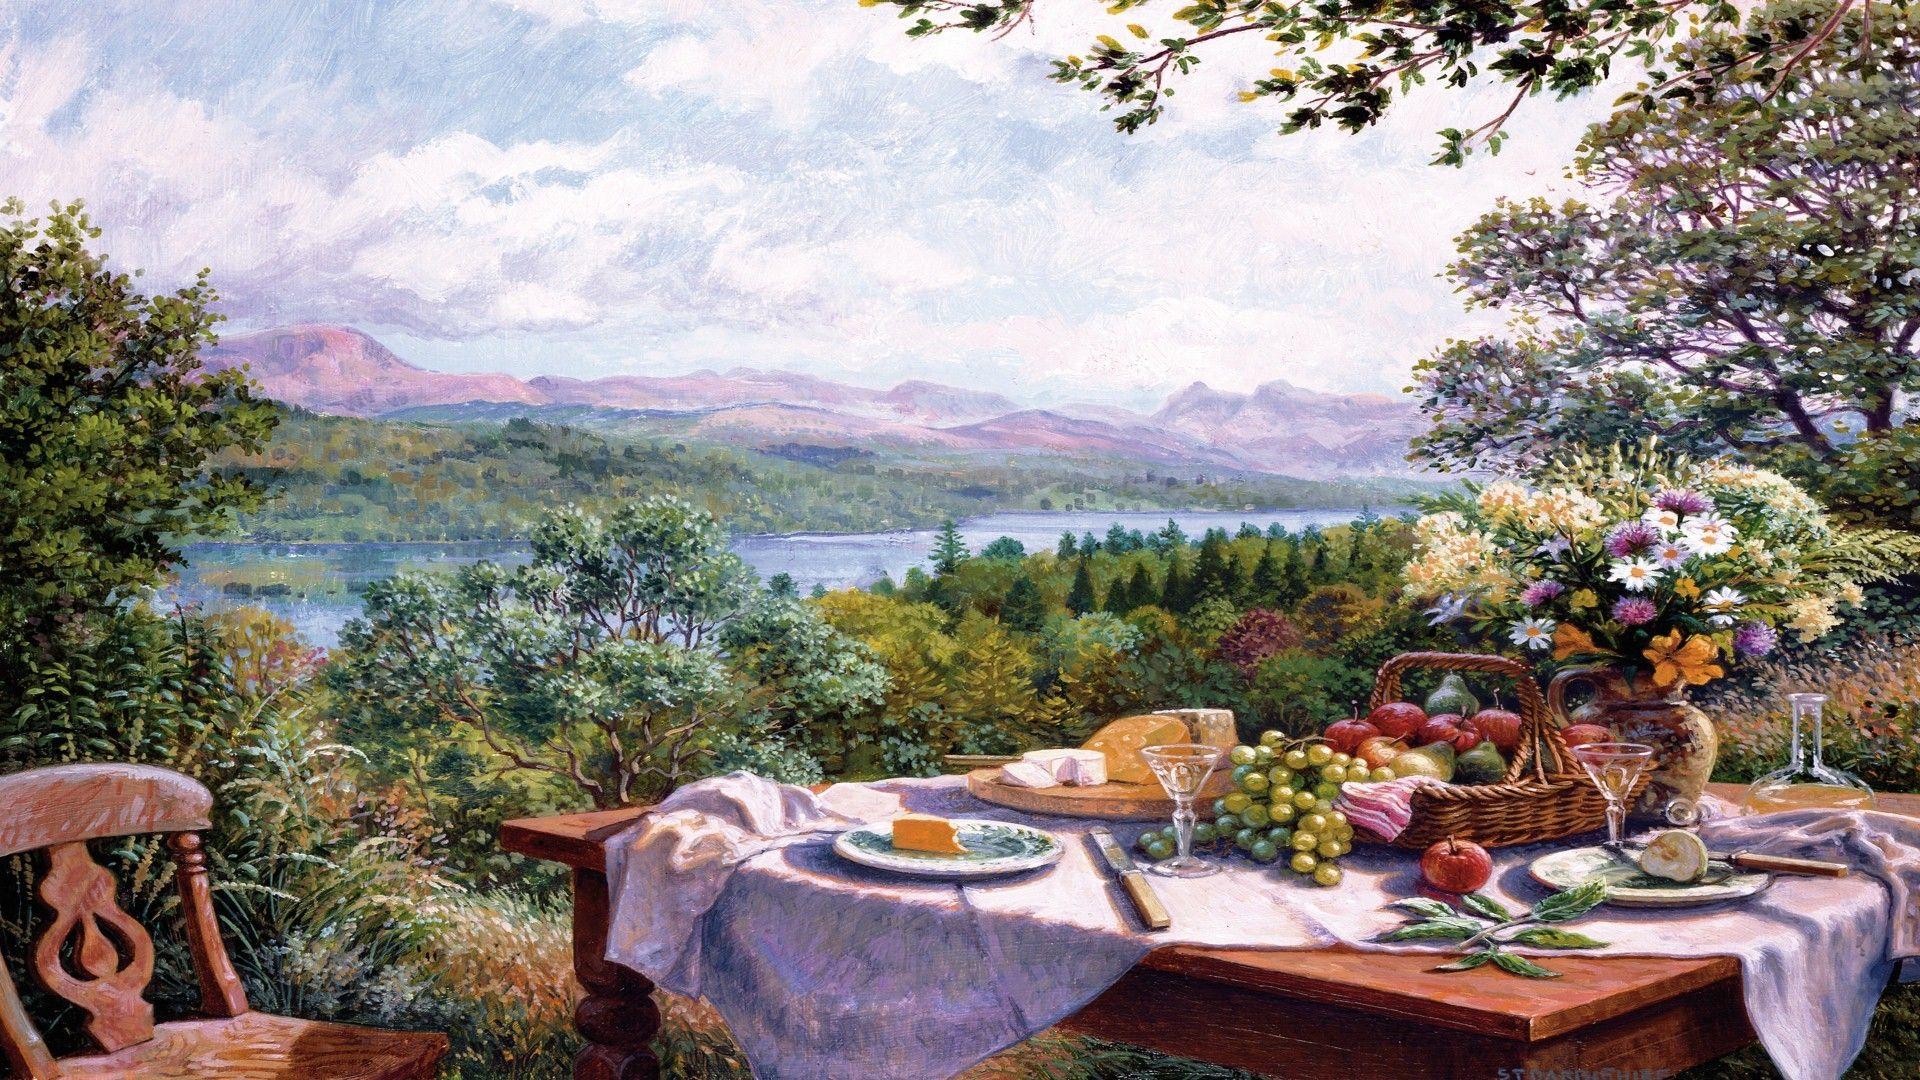 Lakes: Lake Lakeside Scenic Trees Painting Fruit Lunch Picnic